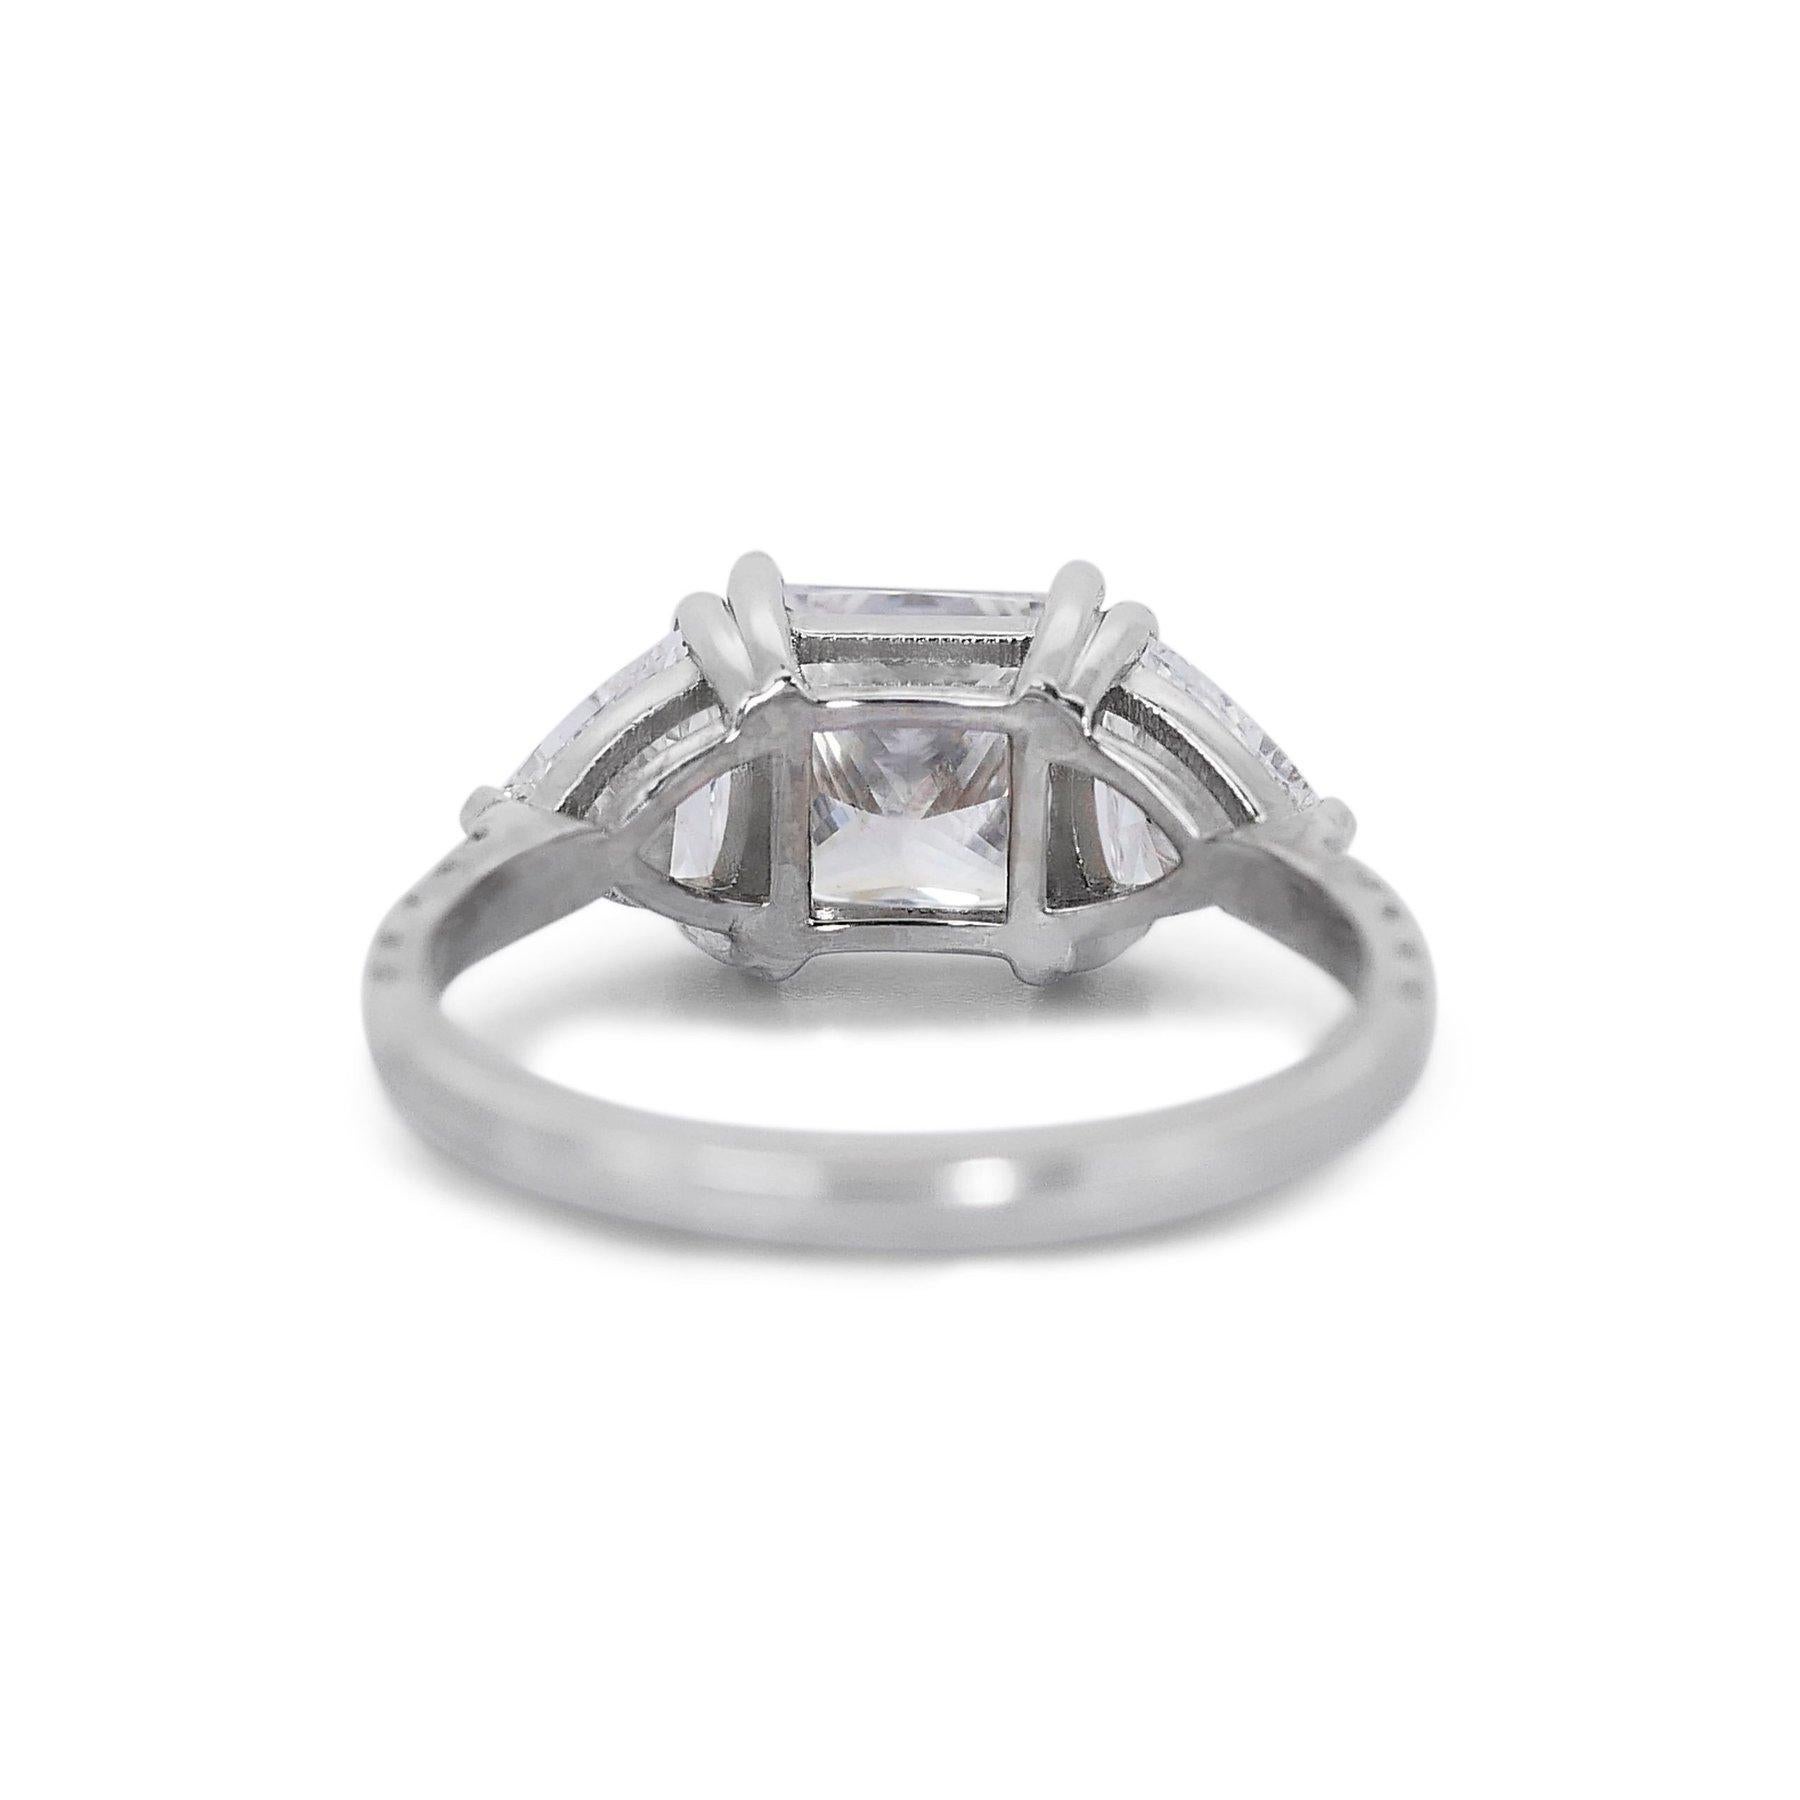 Luminous 2.59ct Diamonds 3-Stone Ring in 18k White Gold - GIA Certified

Crafted from polished 18k white gold, this sophisticated ring features a stunning 1.58-carat square-cut main diamond, boasting an exceptional color grade and clarity. Flanking